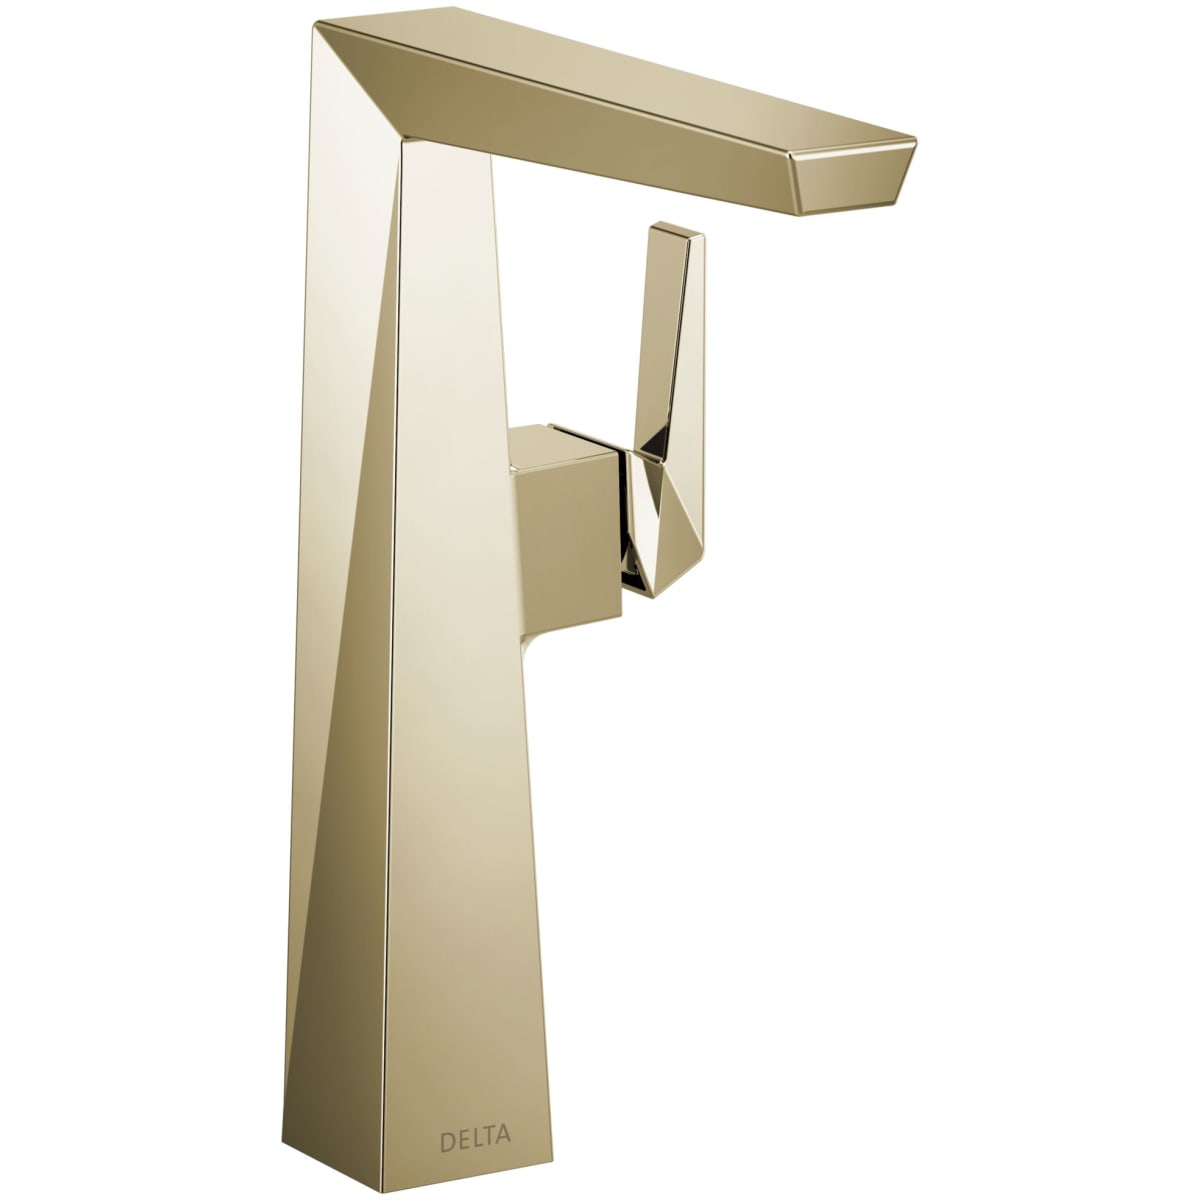 Trillian 1-Lever Handle Vessel Faucet in Polished Nickel